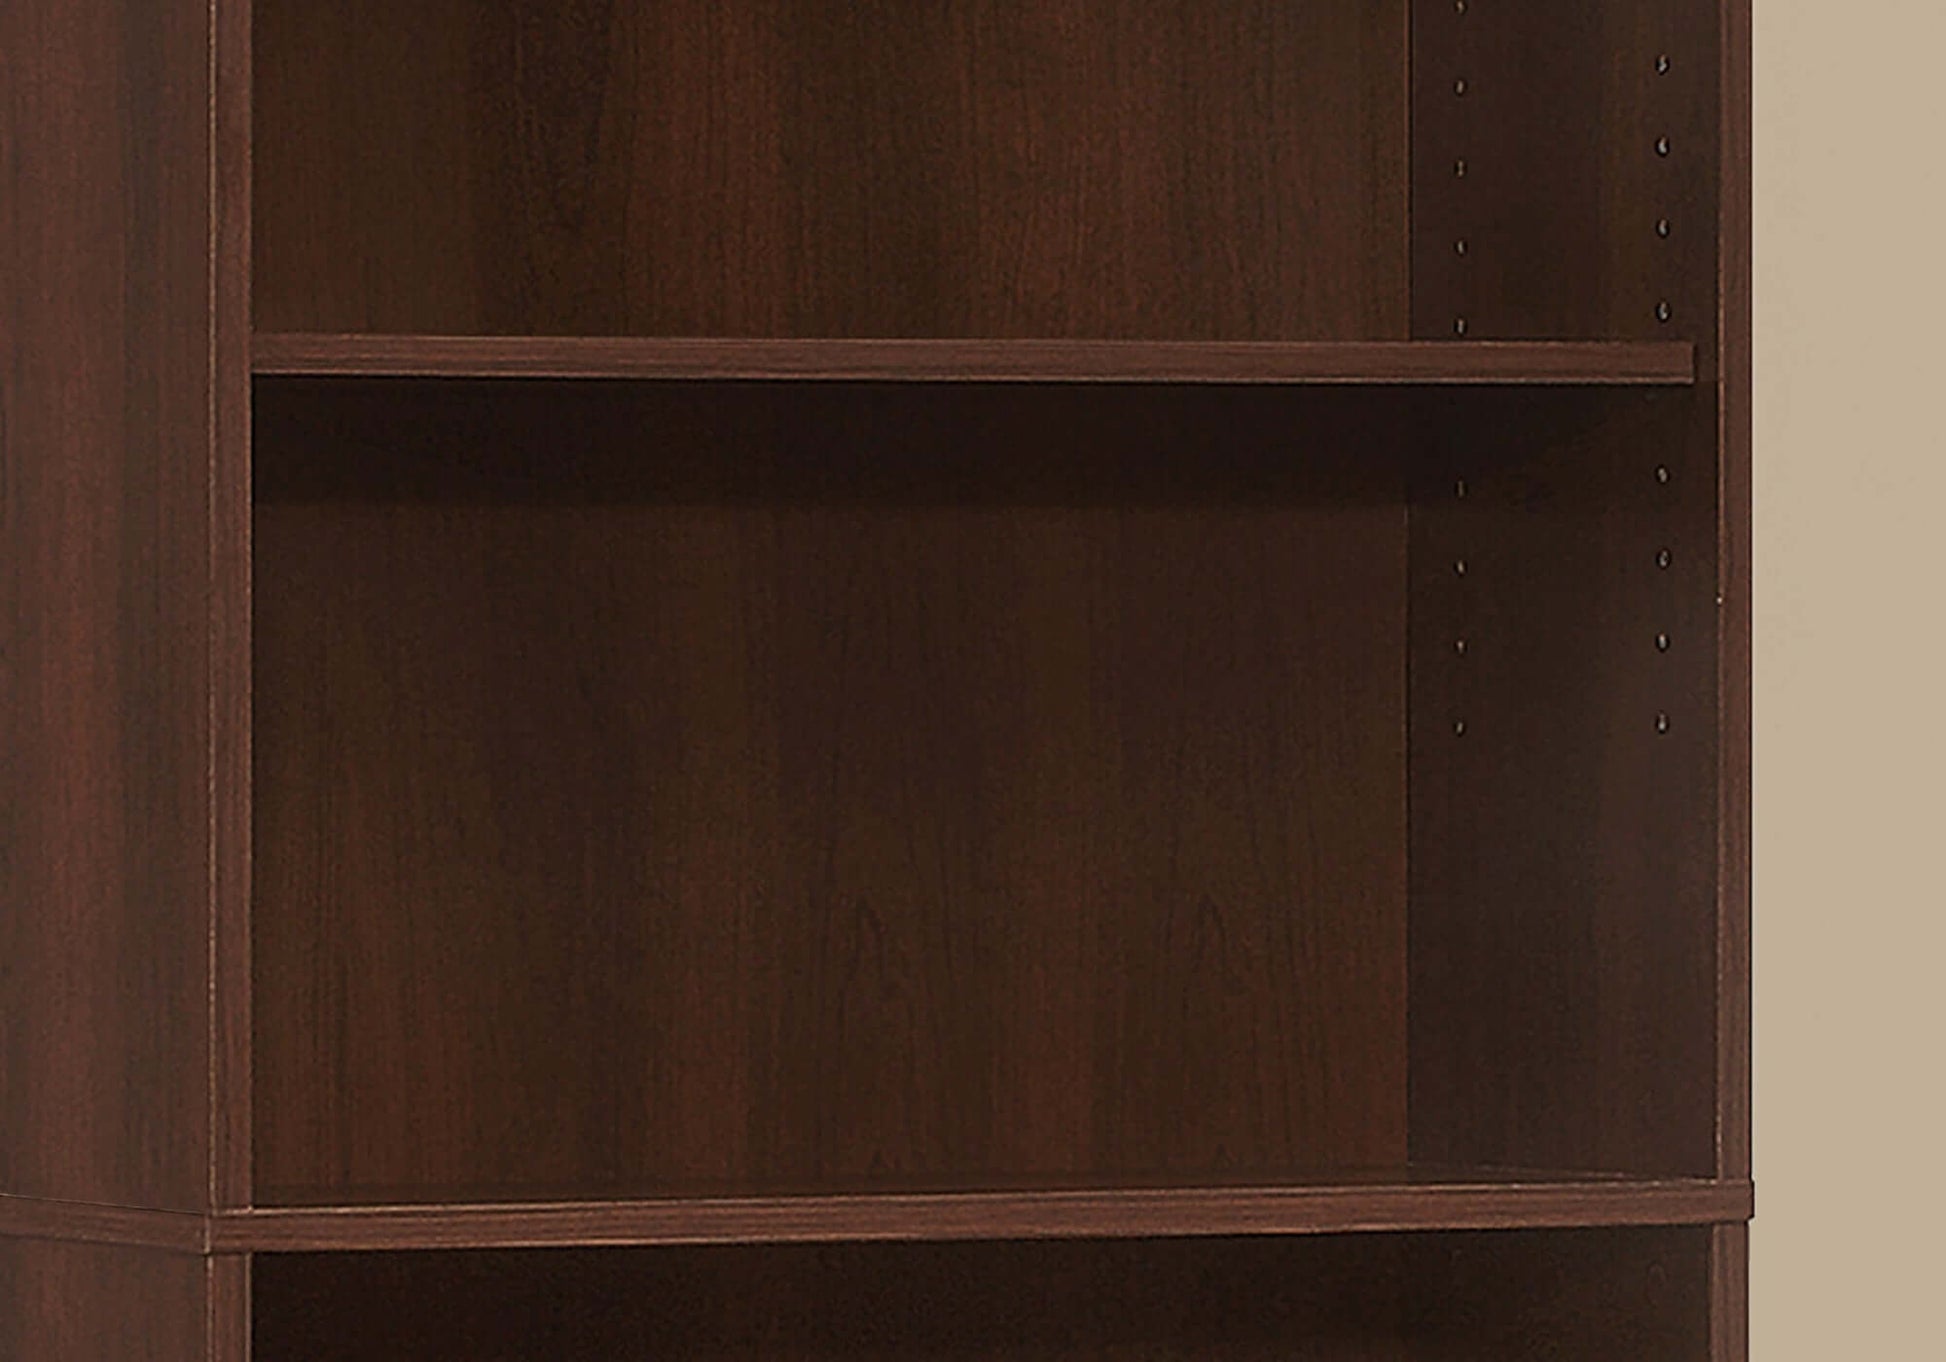 Monarch Specialties - Transitional 72H 5 Shelf Bookcase in Cherry Laminate Finish - I 7466